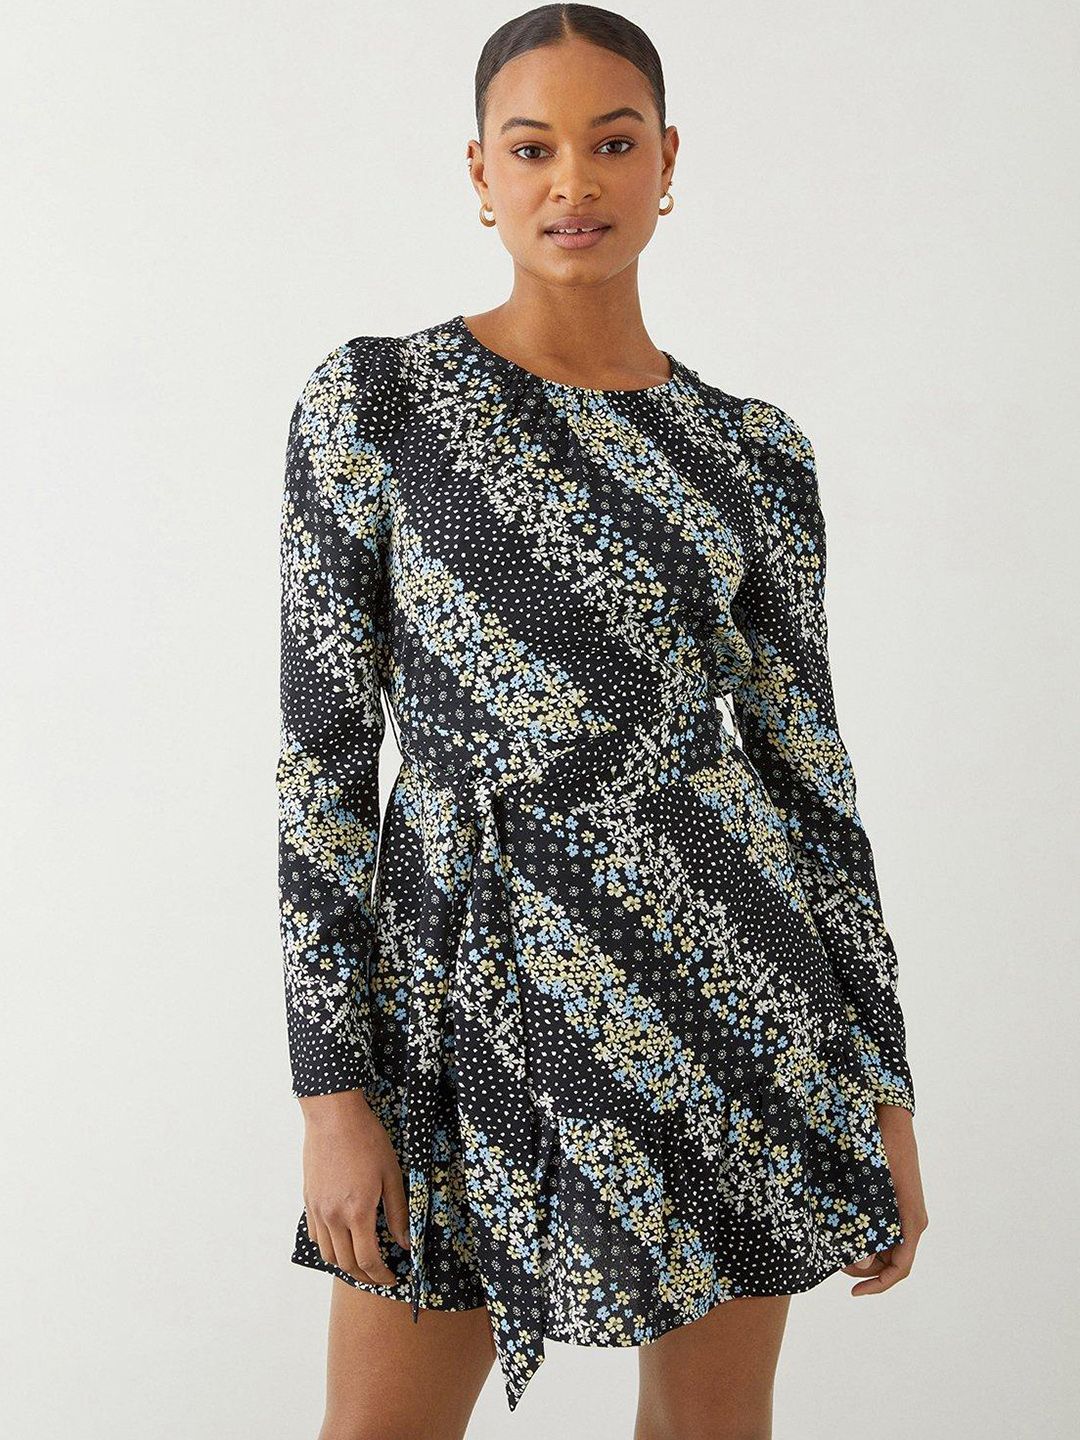 DOROTHY PERKINS Floral Print A-Line Mini Dress Price in India